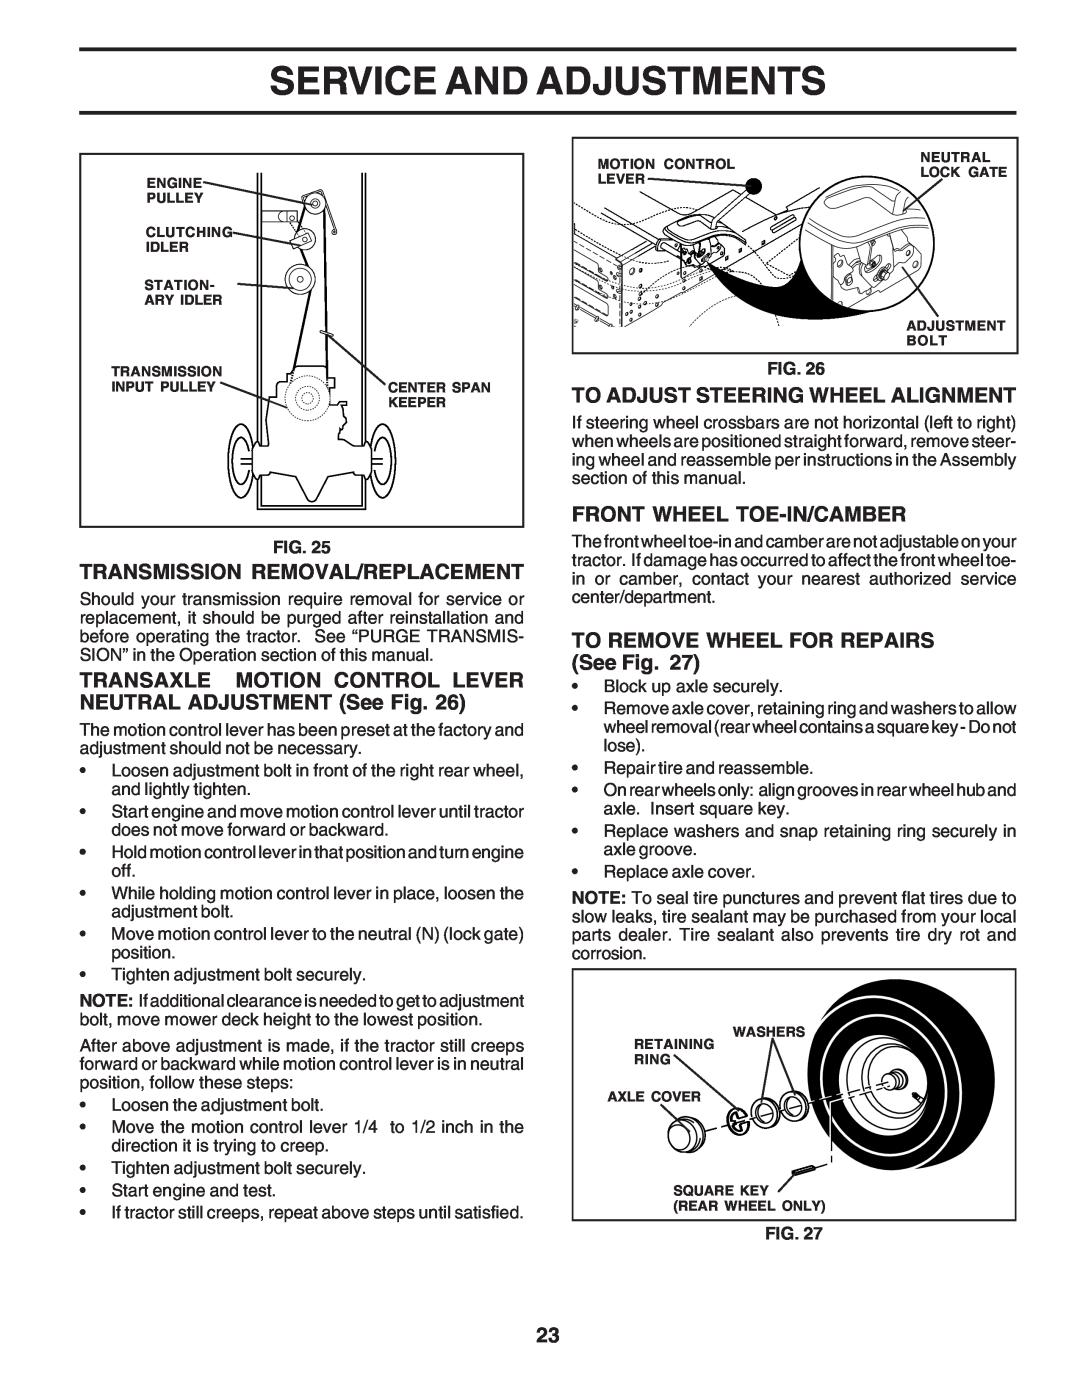 Poulan PPR20H42STB owner manual Transmission Removal/Replacement, TRANSAXLE MOTION CONTROL LEVER NEUTRAL ADJUSTMENT See Fig 